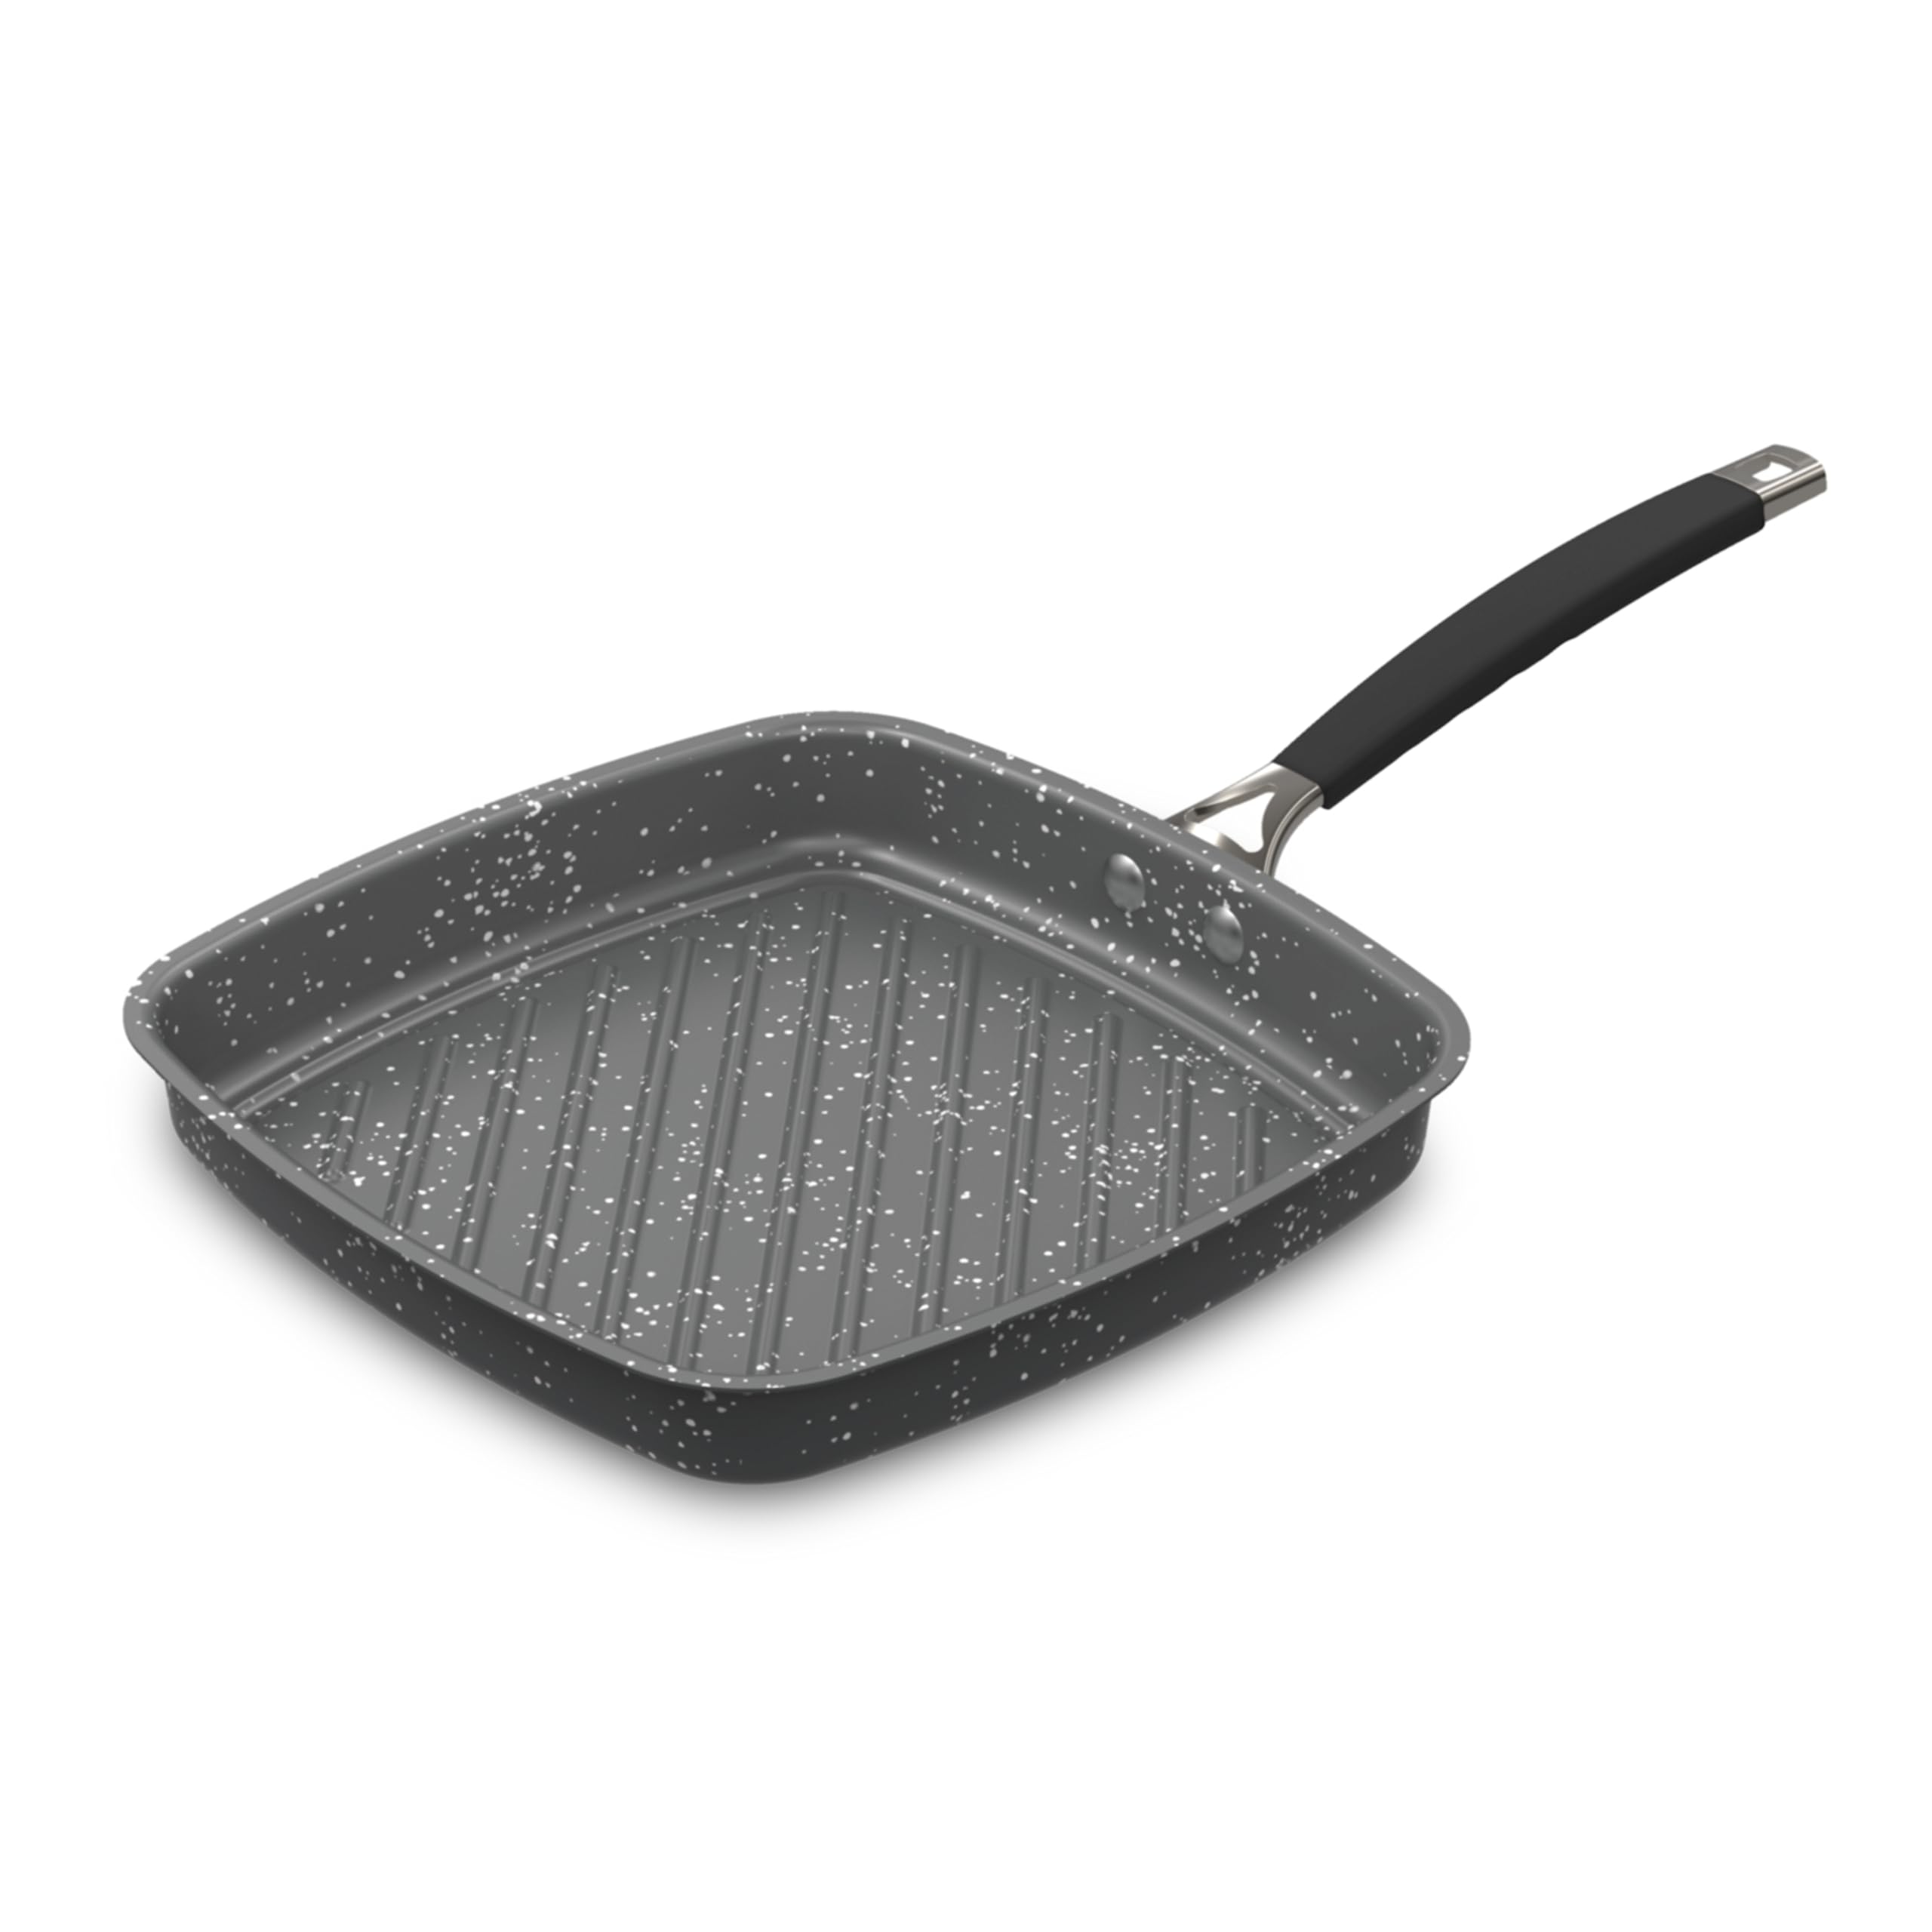 Nordic Ware Verde Aluminized Steel Cookware with Ceramic Coating, Searing Grill Pan 10-Inch